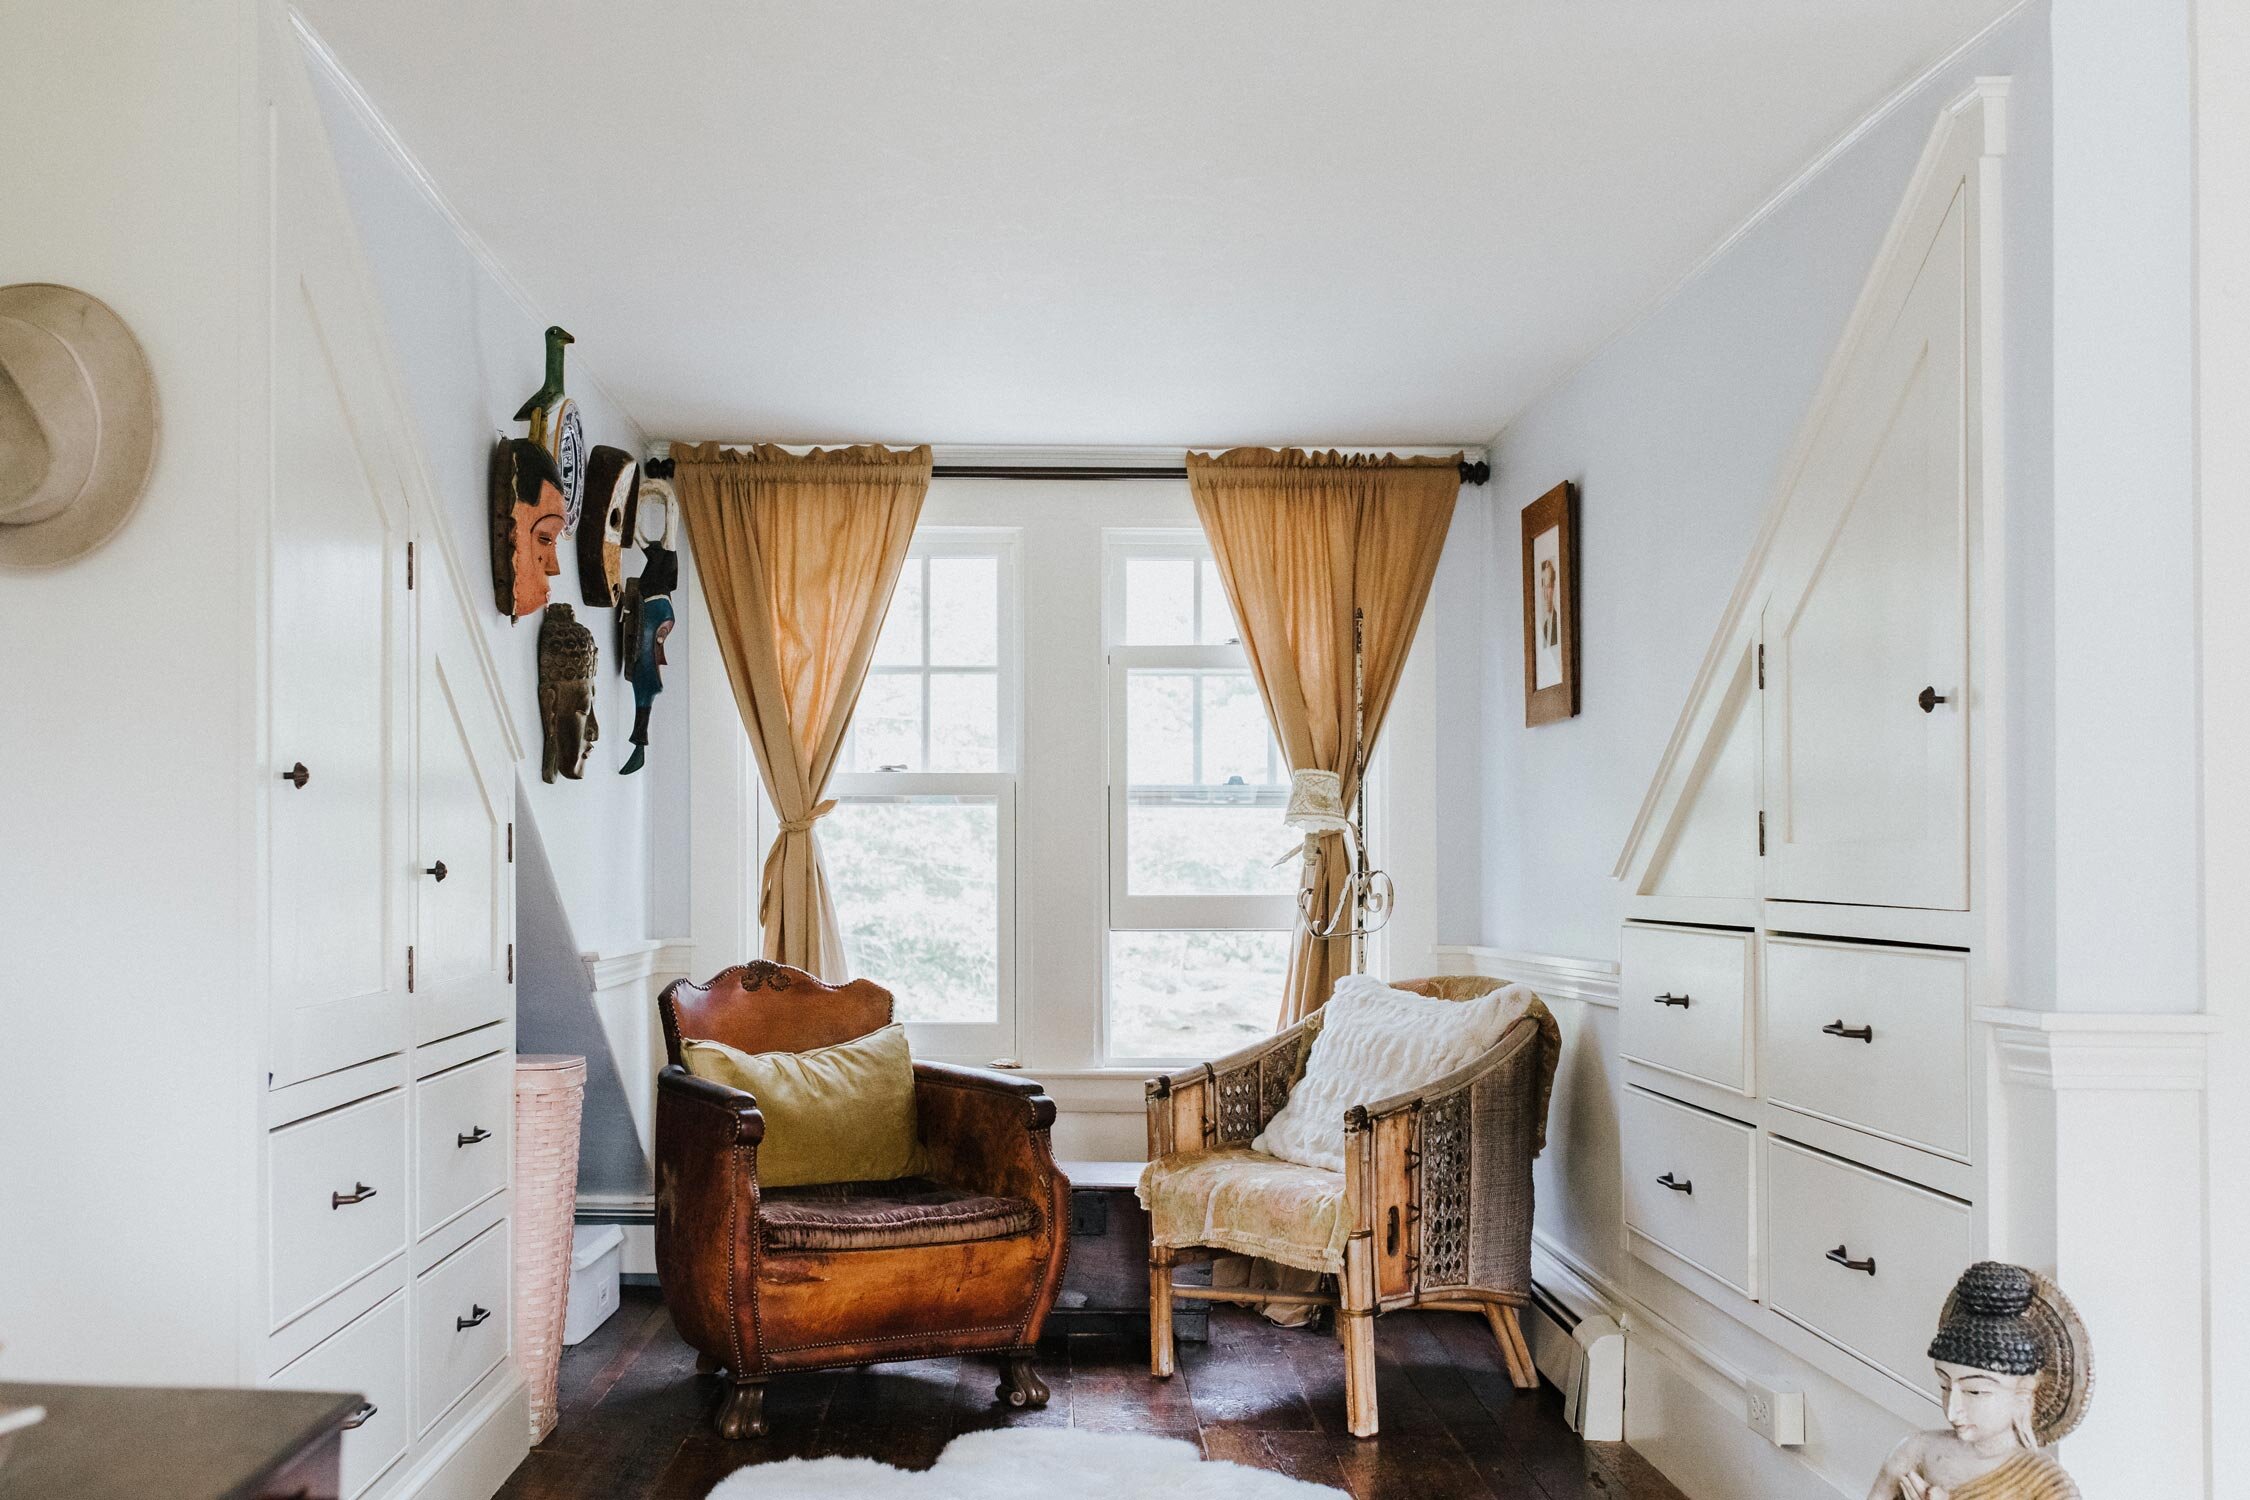  His and hers reading chairs in the owner’s bedroom suite. On either side, white built-in cabinets and drawers provide additional storage without taking up unnecessary space. 